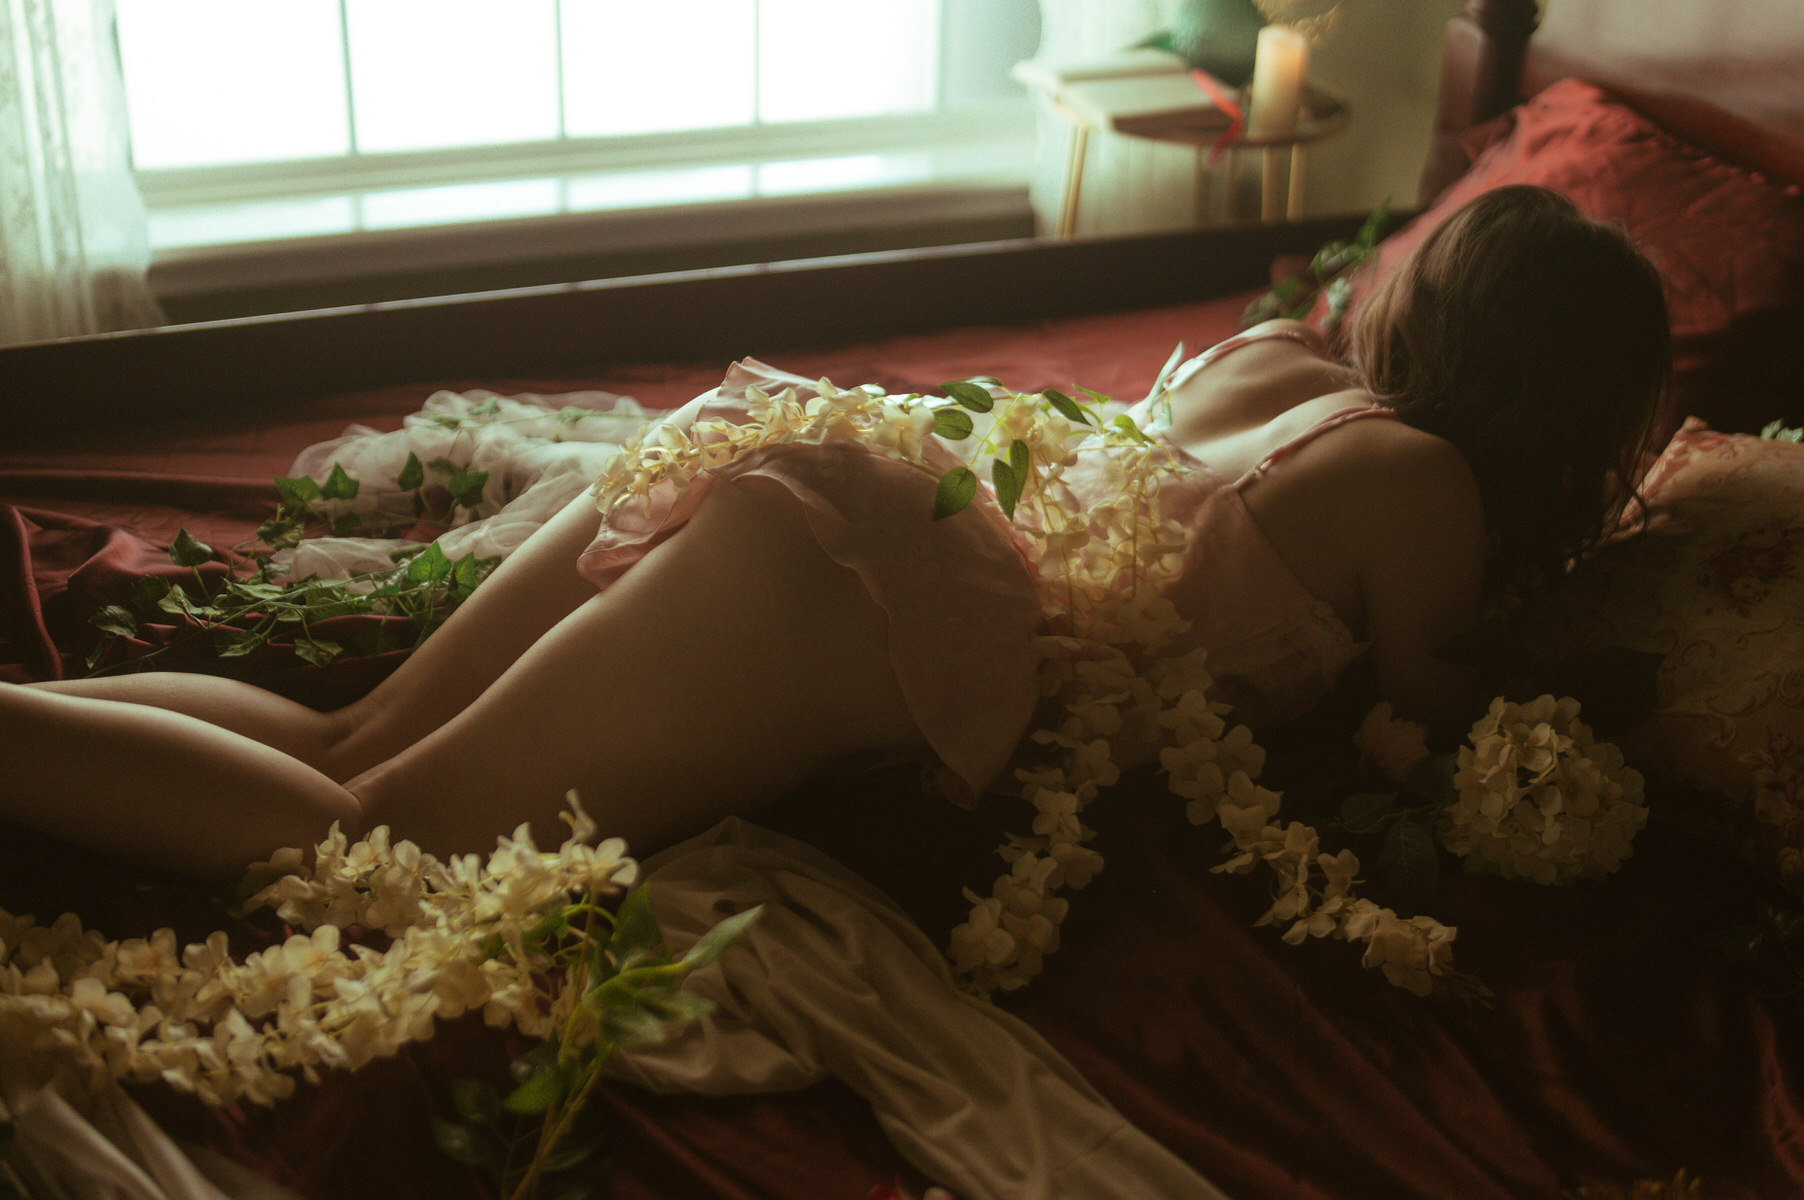 A Dallas woman posing on a bed adorned with flowers in a boudoir photoshoot.